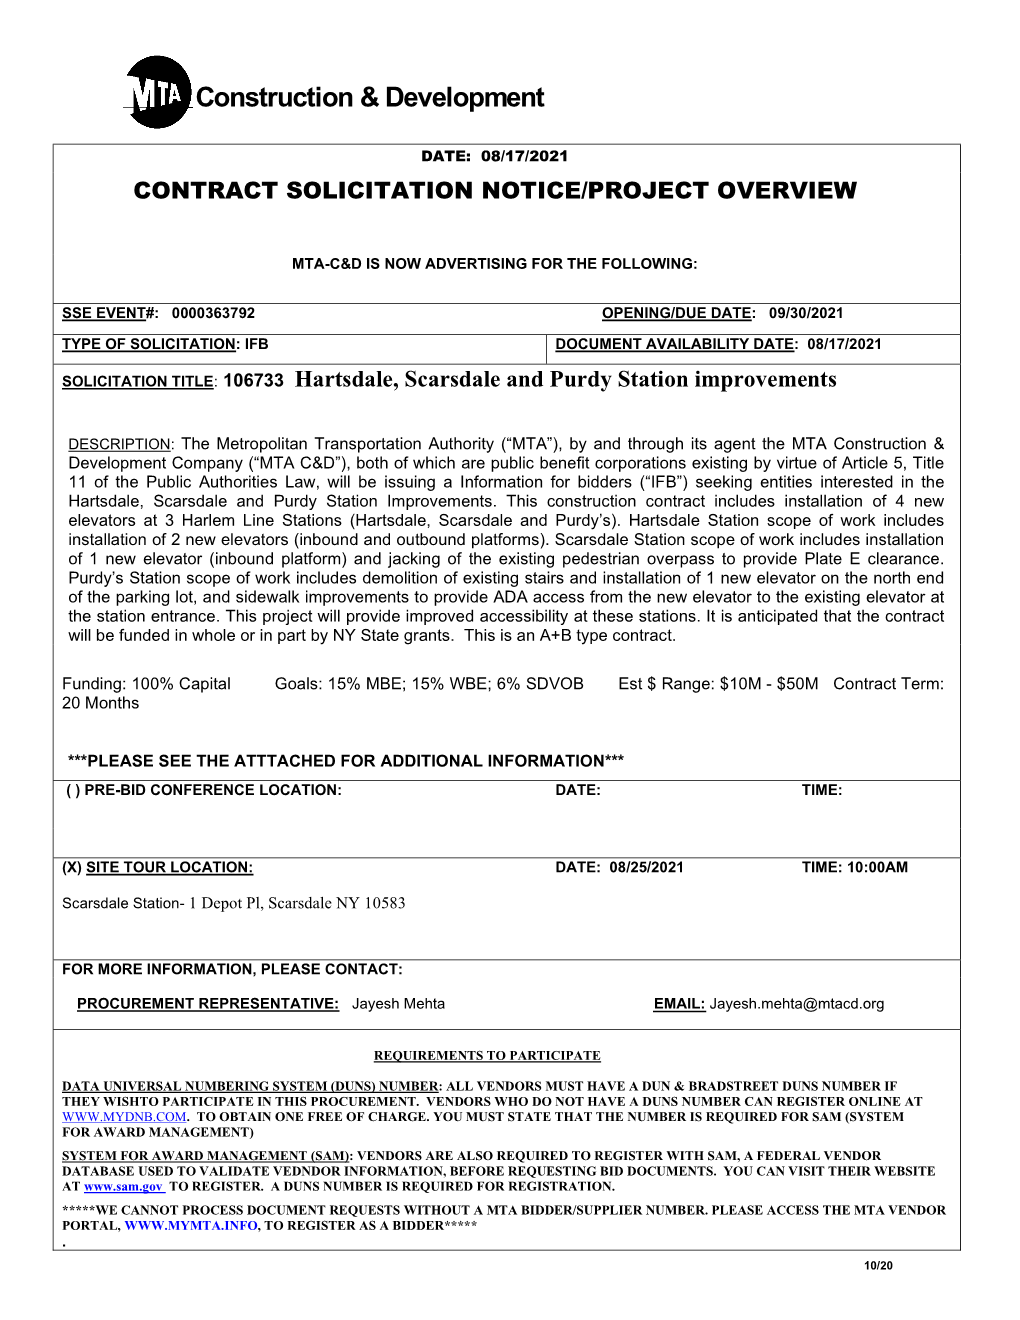 Solicitation Notice/Project Overview